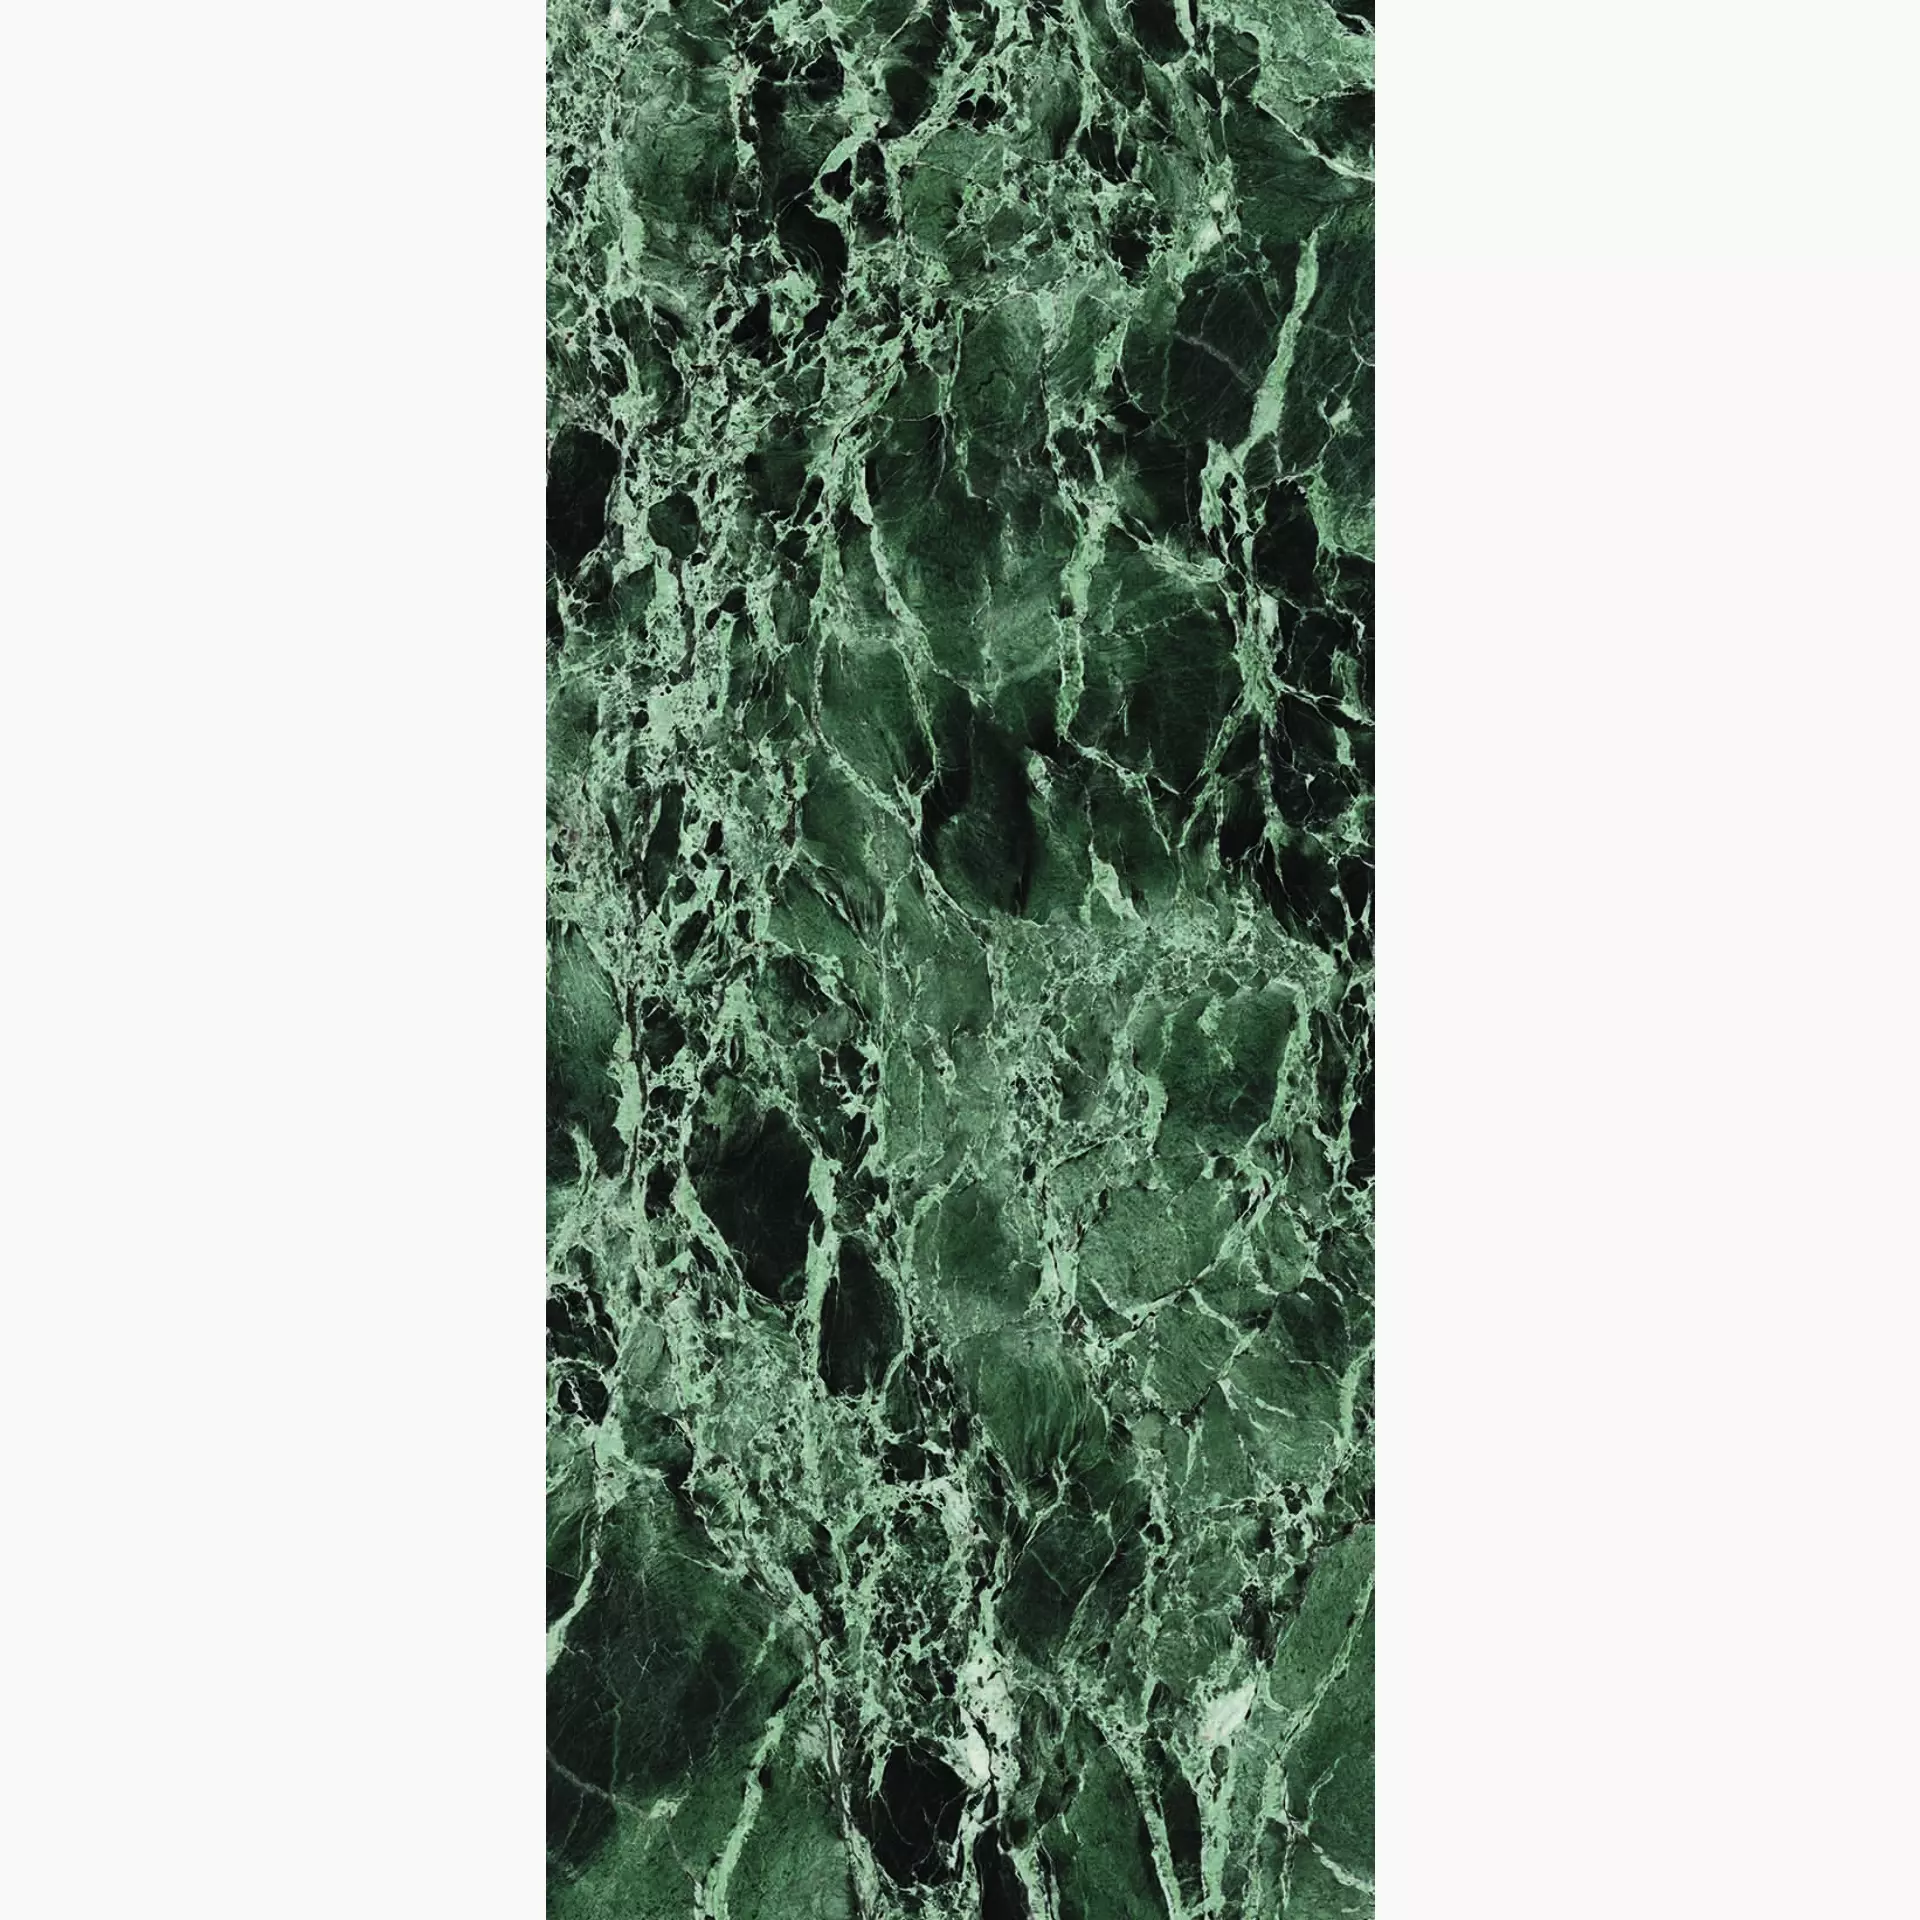 Fondovalle Infinito 2.0 Green Denis Glossy INF2270 120x278cm rectified 6,5mm